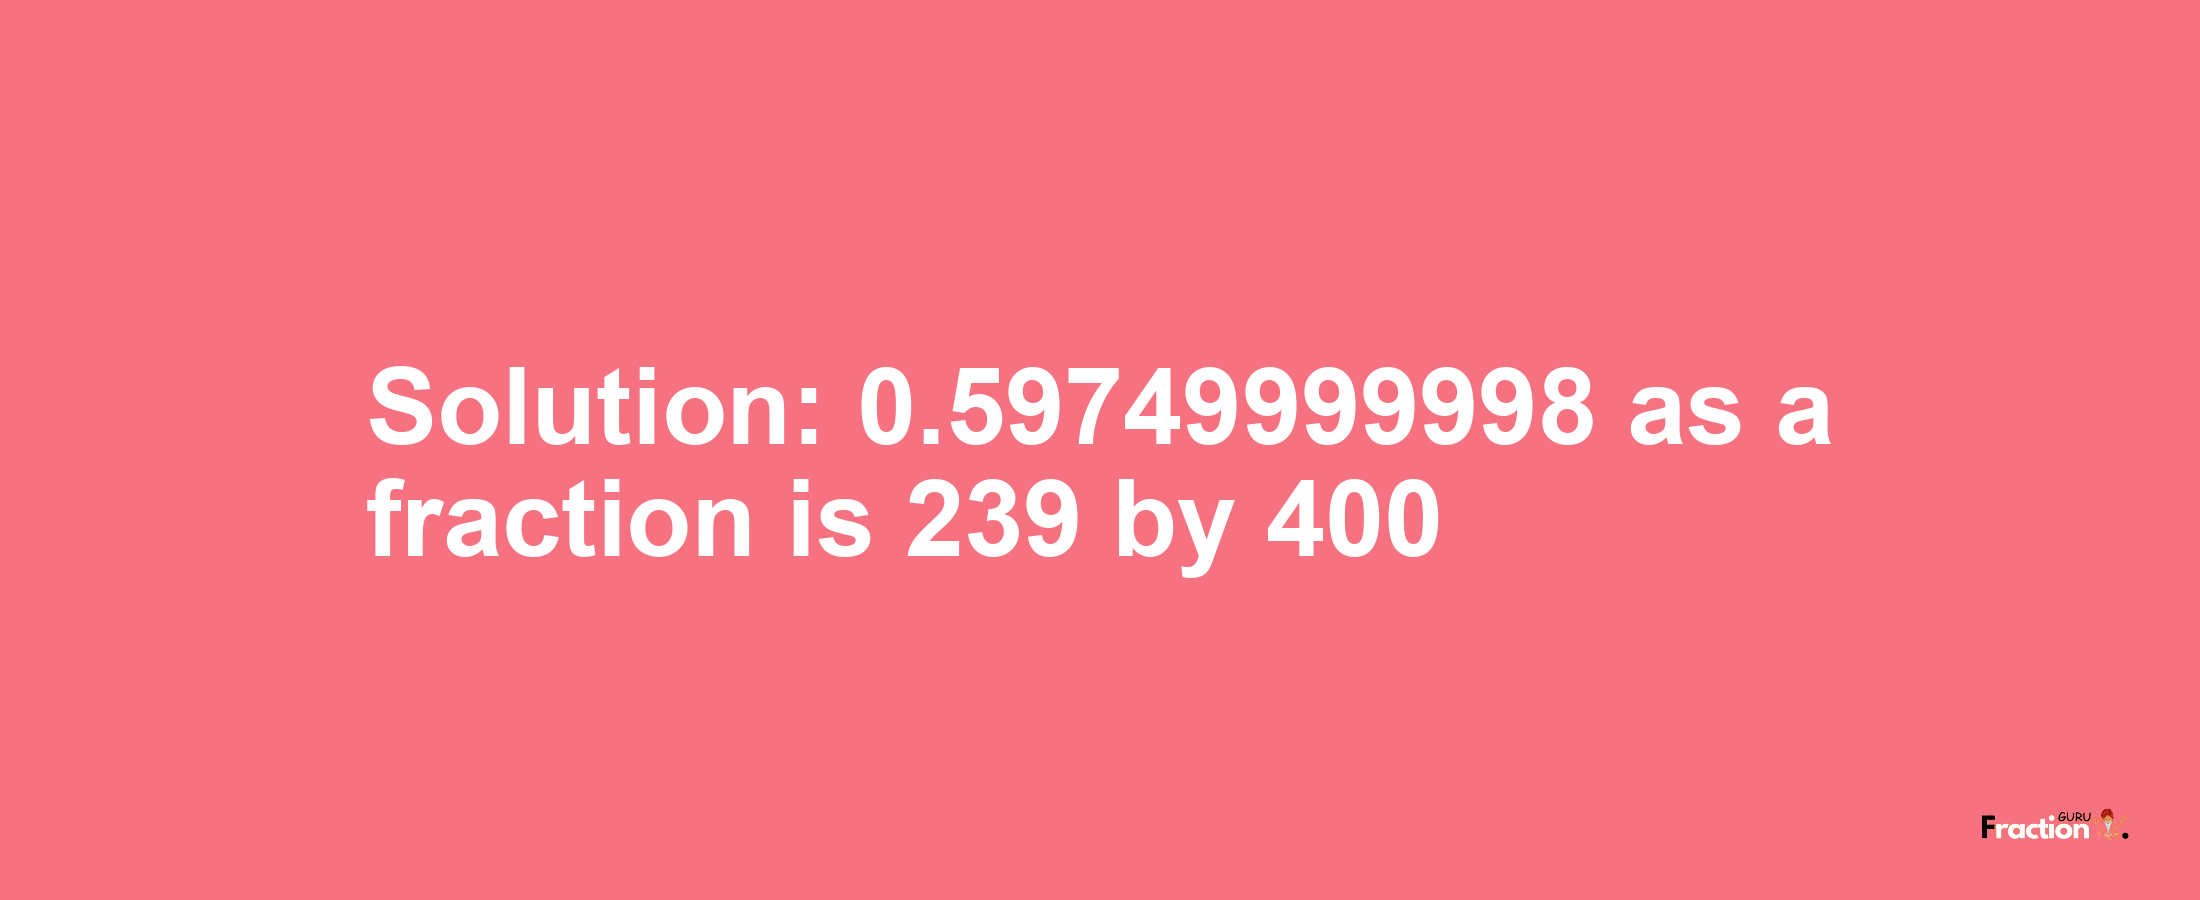 Solution:0.59749999998 as a fraction is 239/400